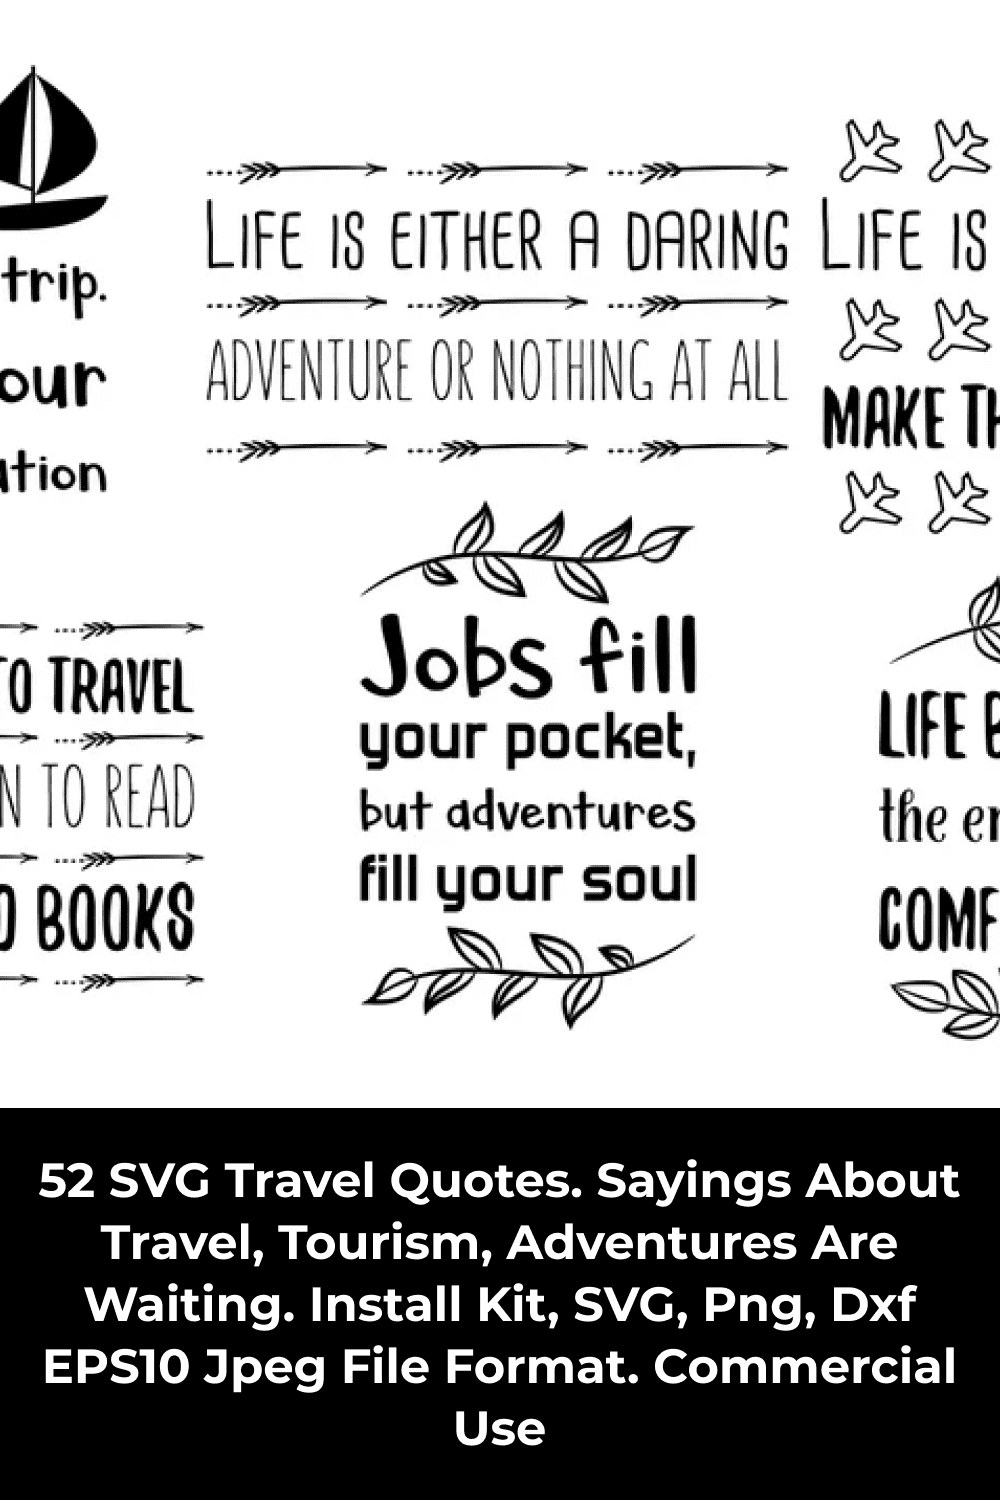 04 52 svg travel quotes 1000h1500